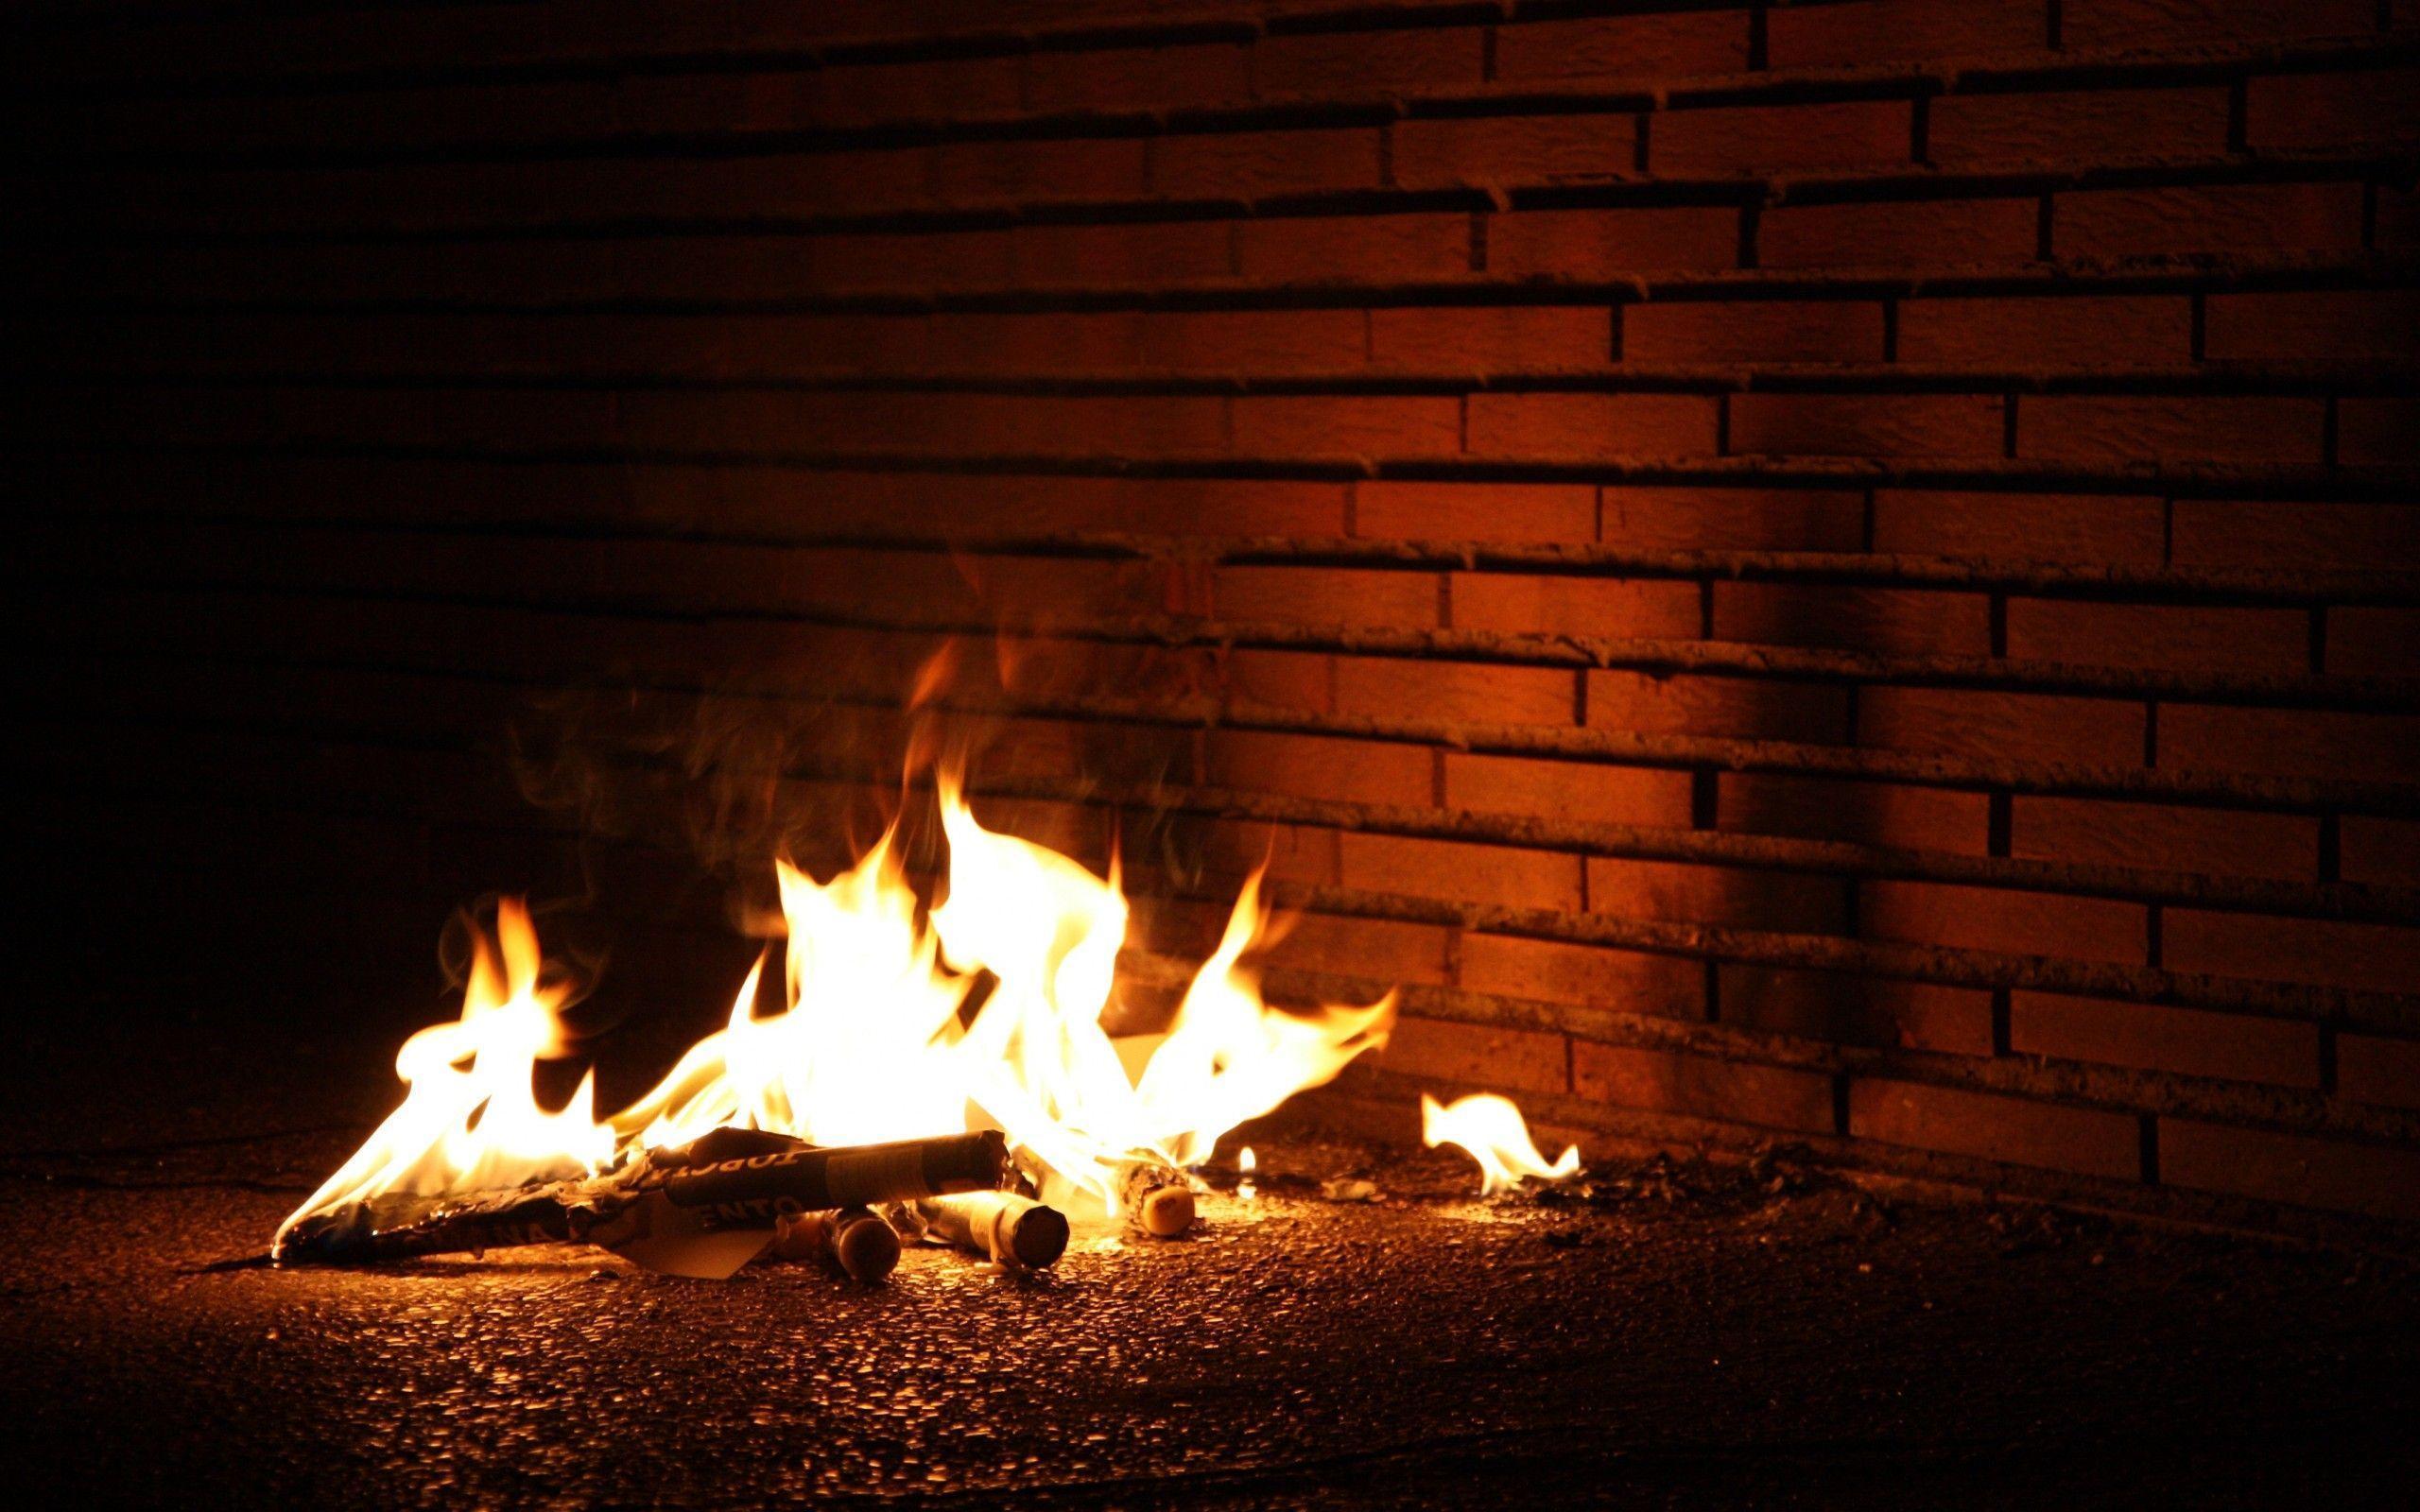 fire Theme wallpaper and image, picture, photo